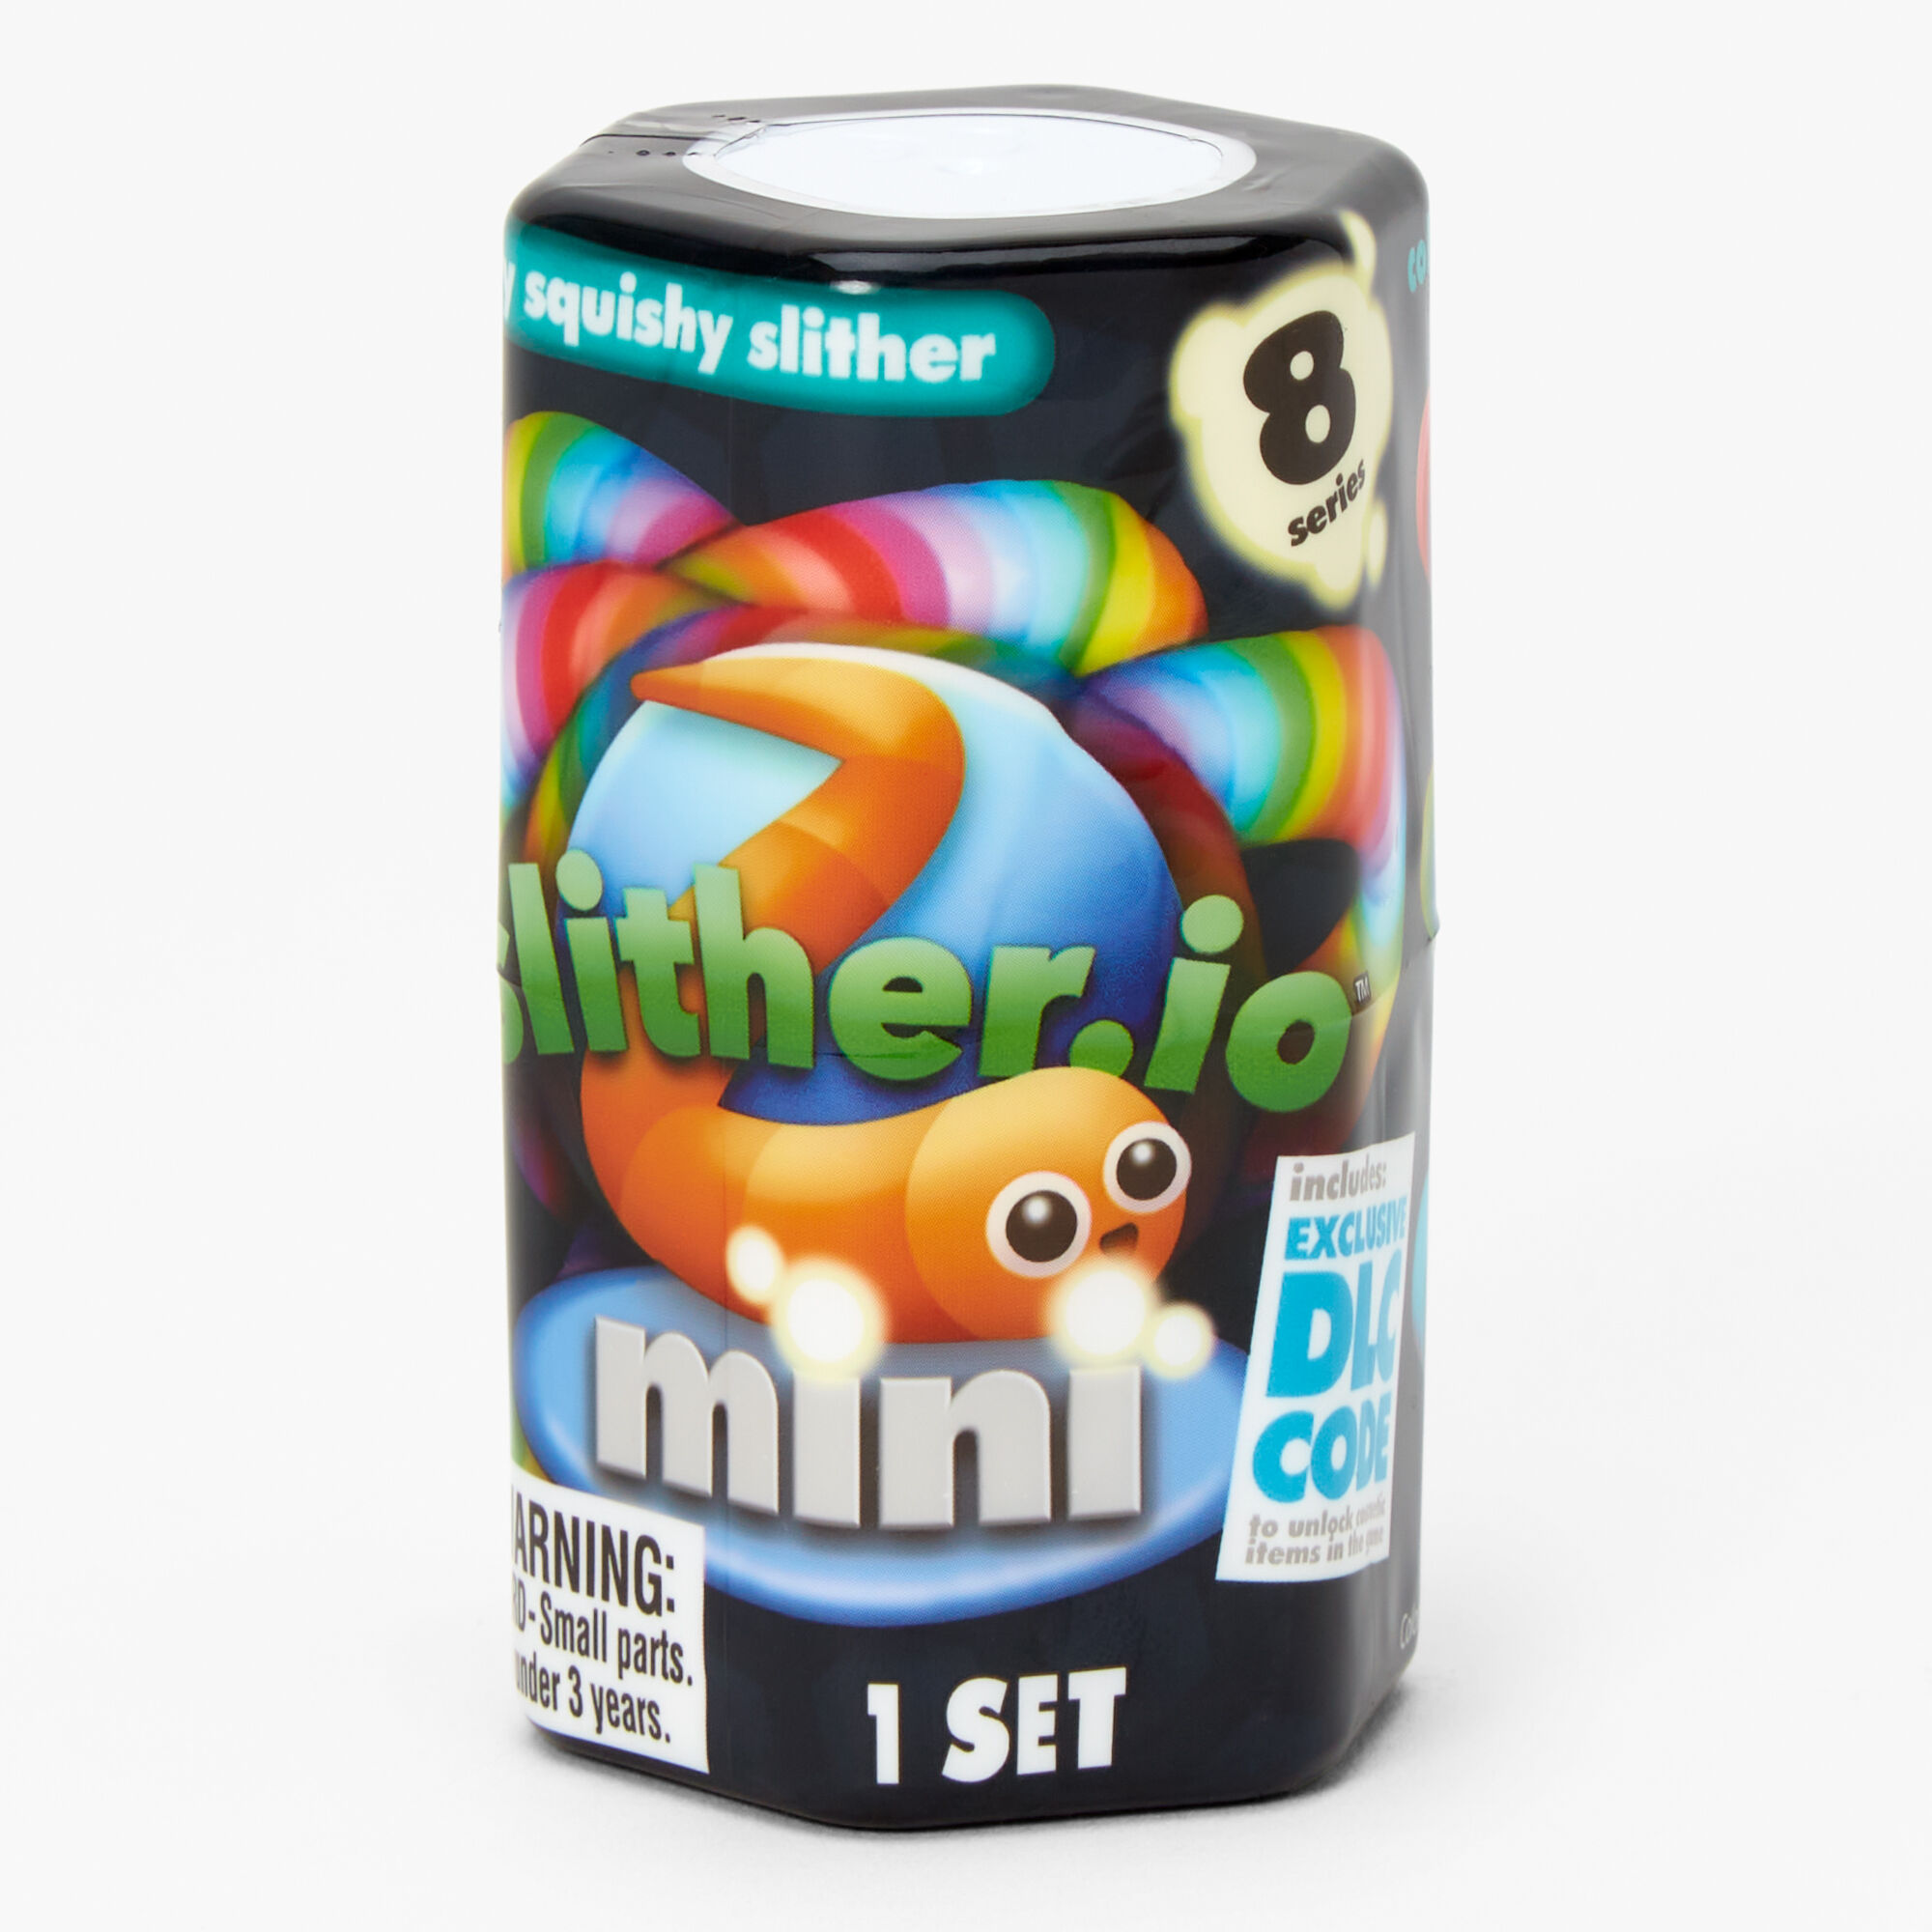 Slither.io Slither 3 Pack With Mystery Series 1 Caterpillars for sale online